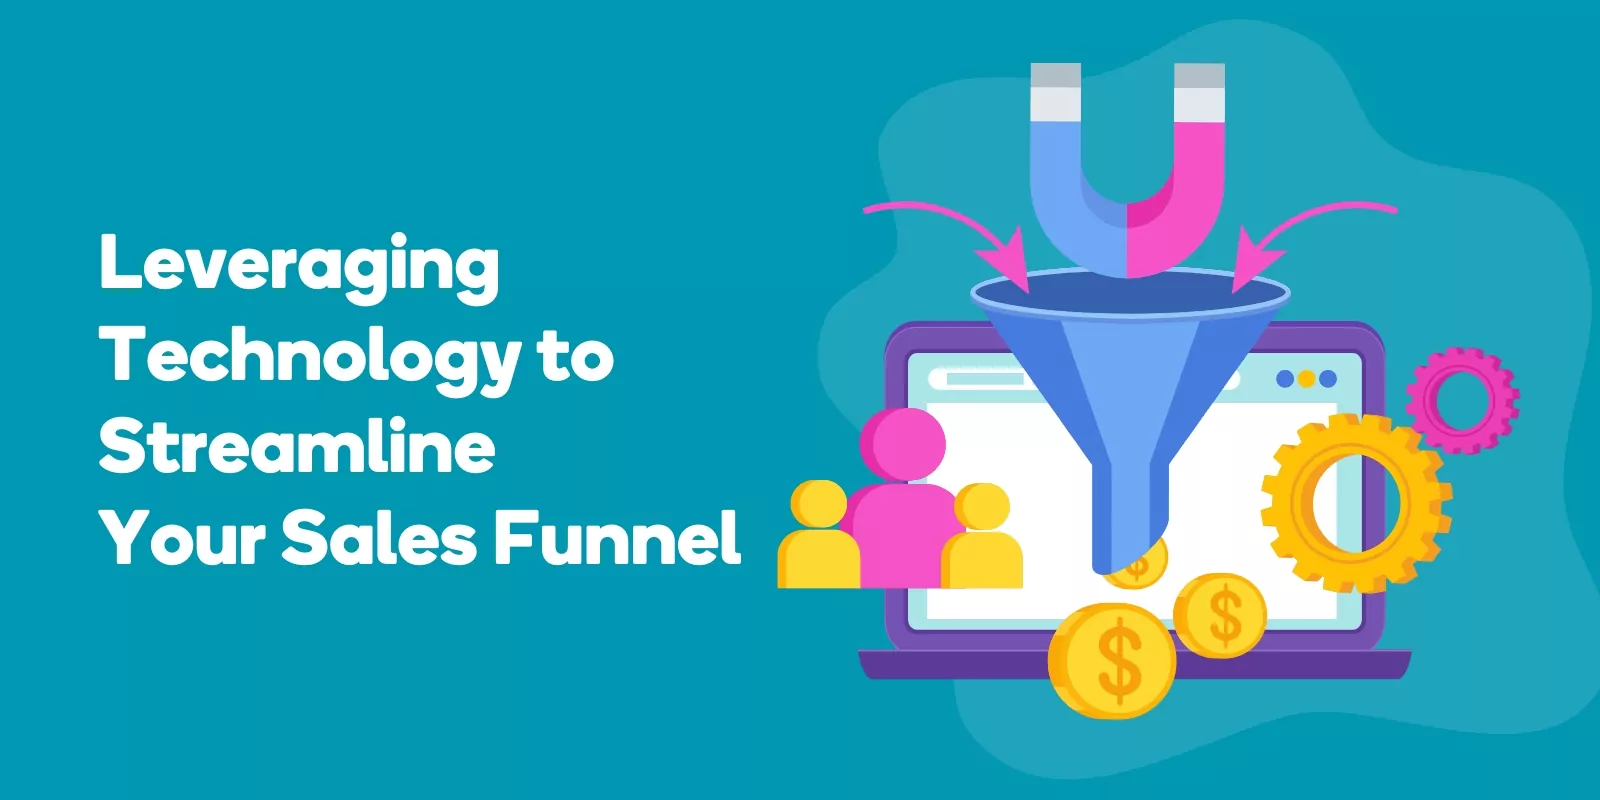 Leveraging Technology to Streamline Your Sales Funnel